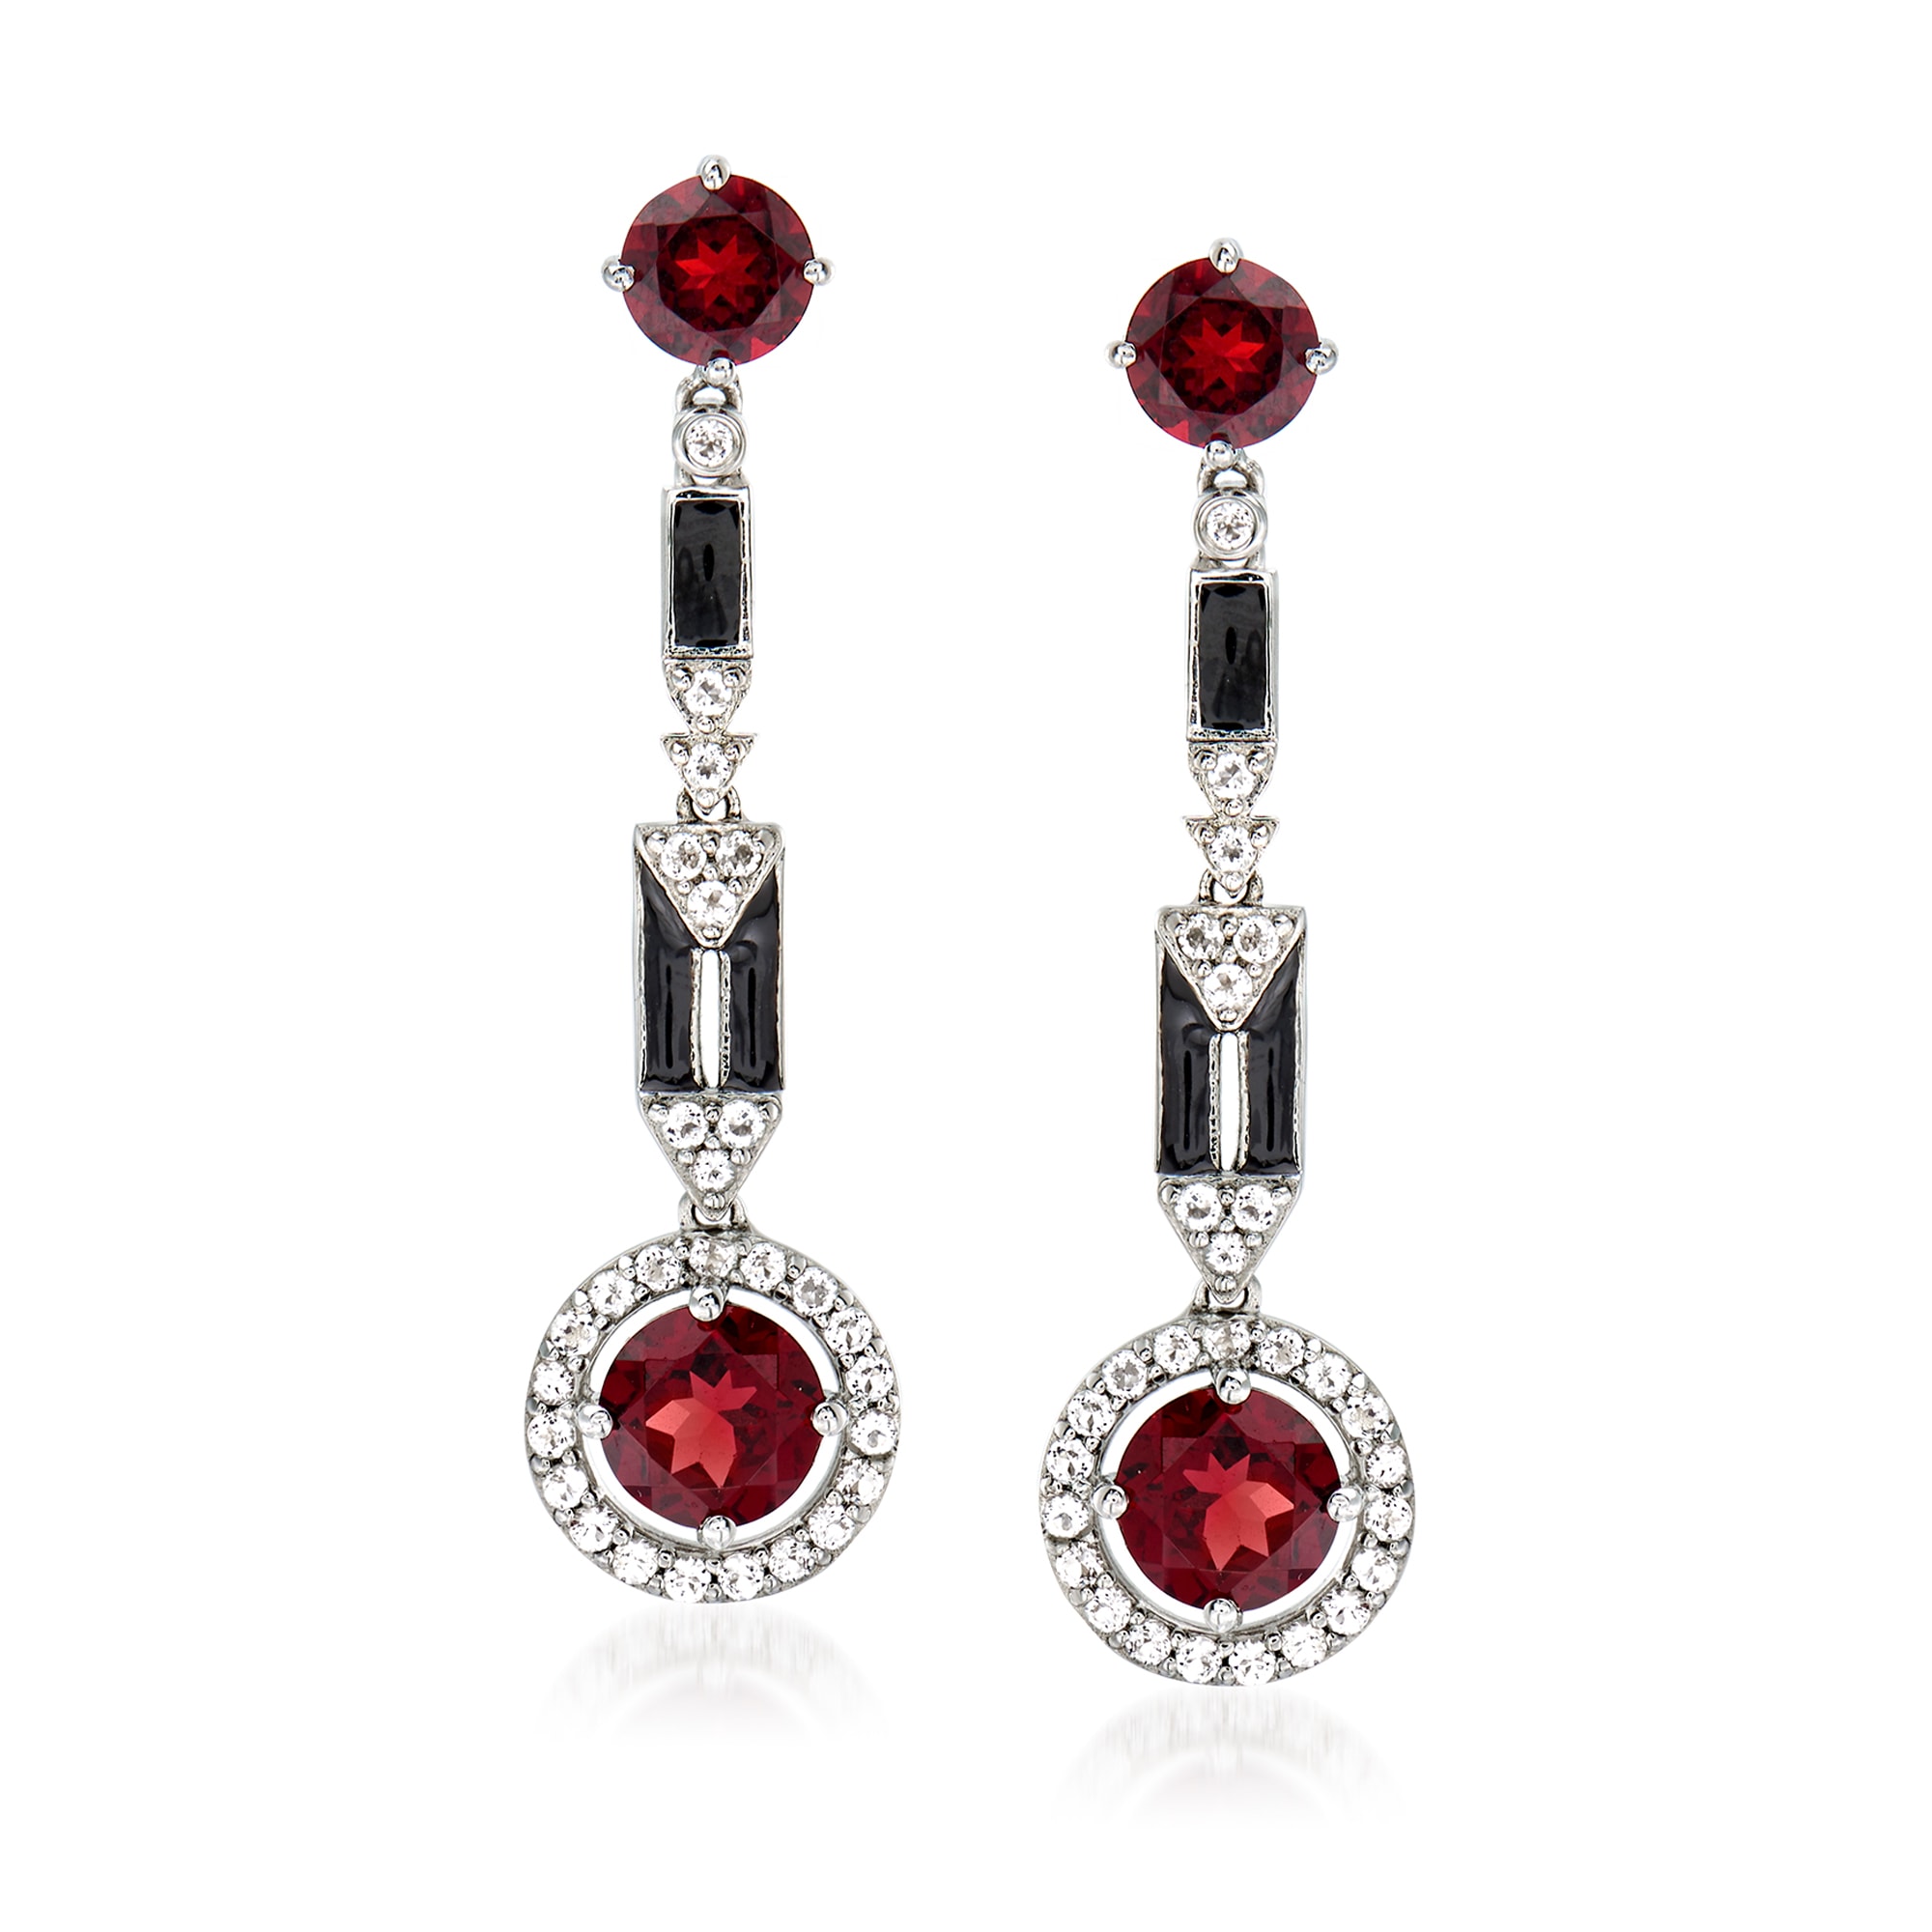 5.90 ct. t.w. Garnet and 1.00 ct. t.w. White Topaz Drop Earrings with ...